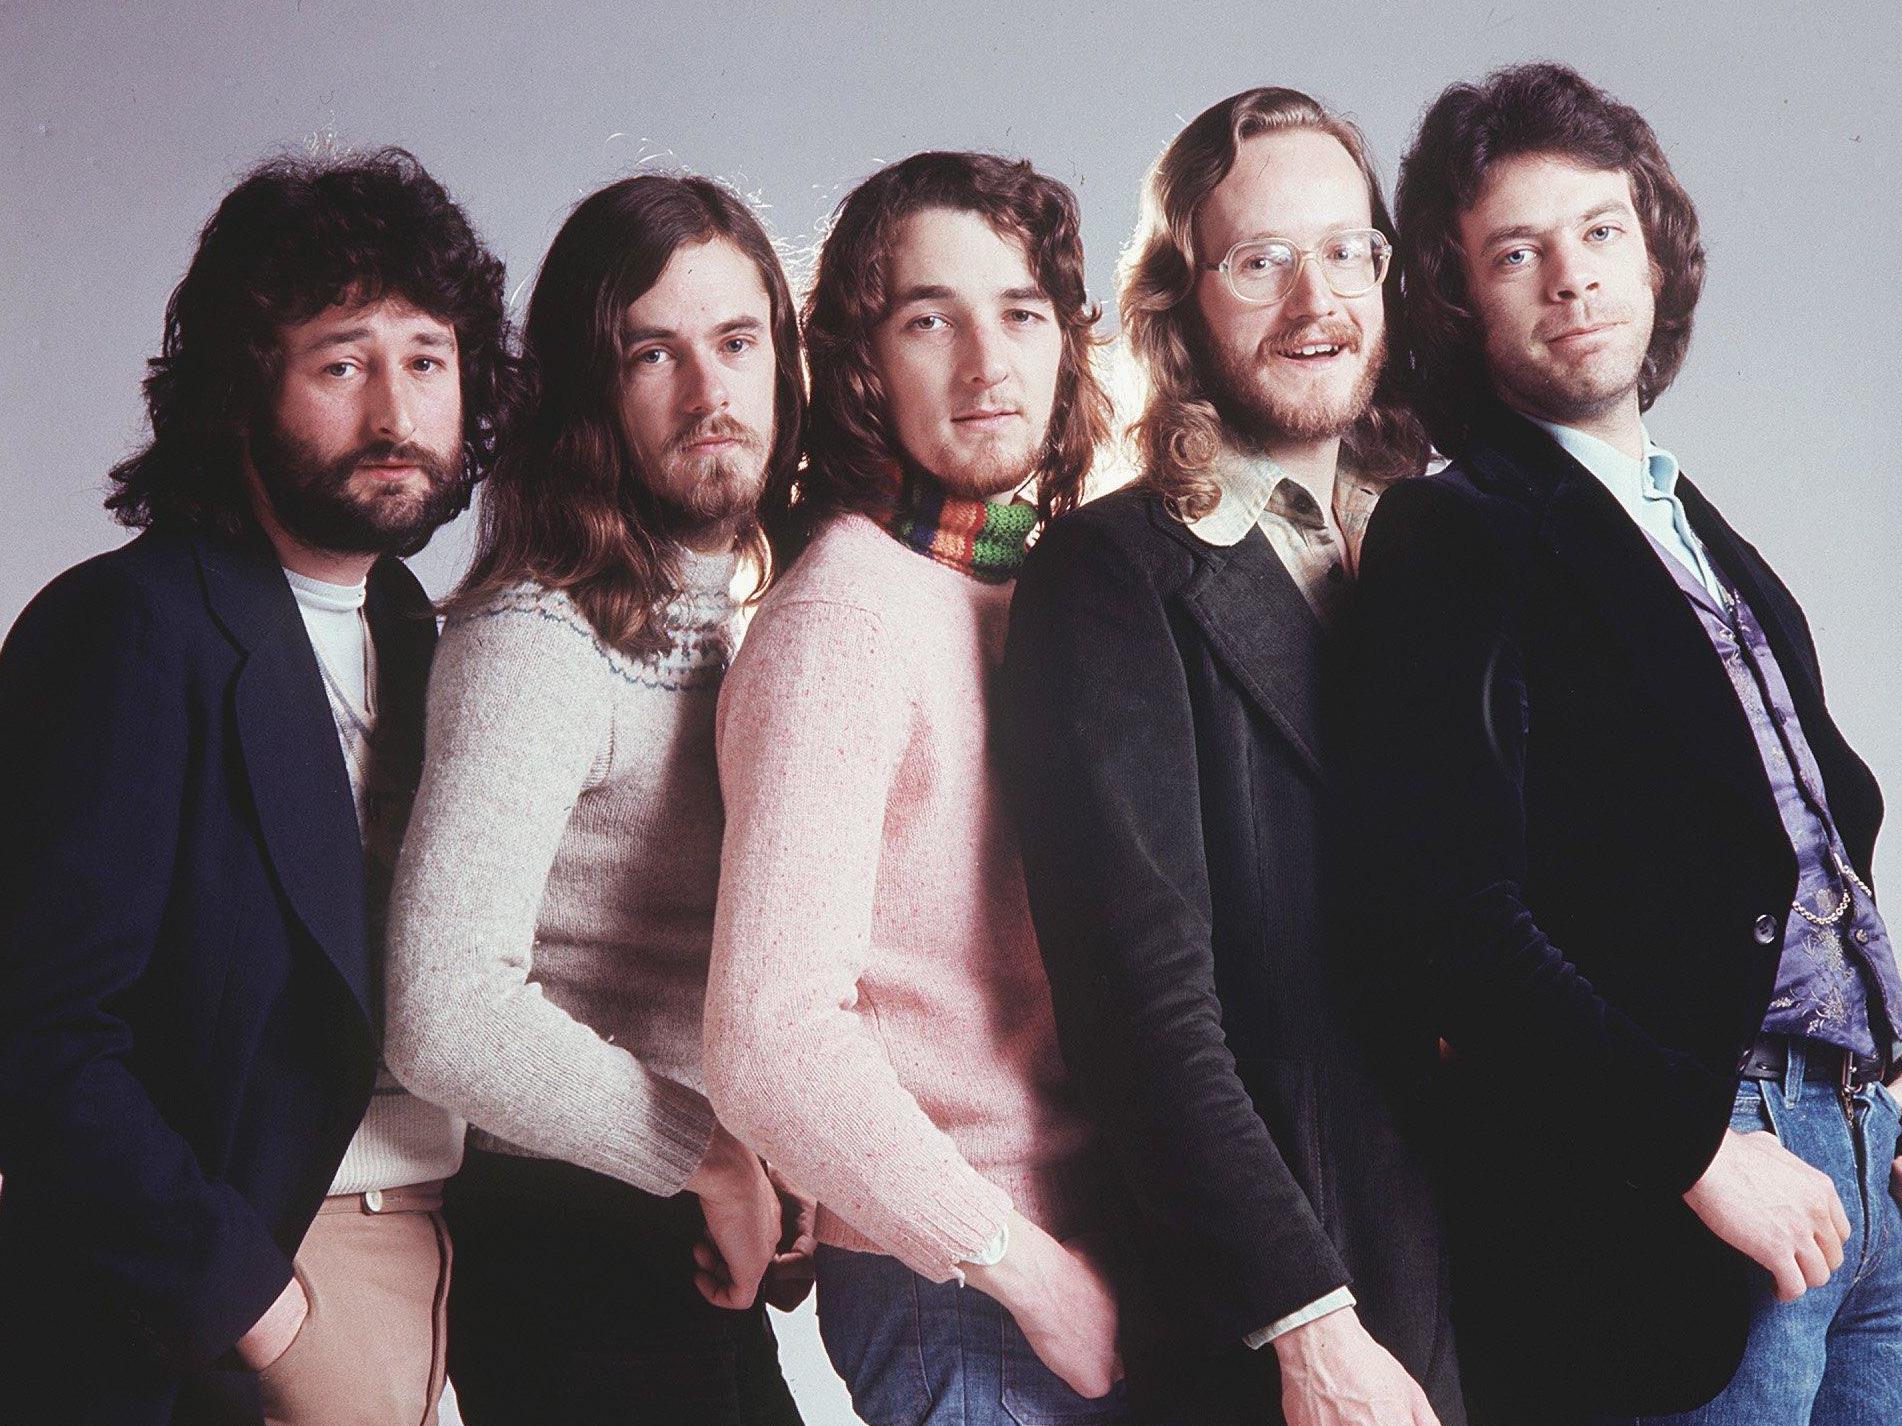 Why Supertramp's Breakfast in America goes beyond cheese, The Independent